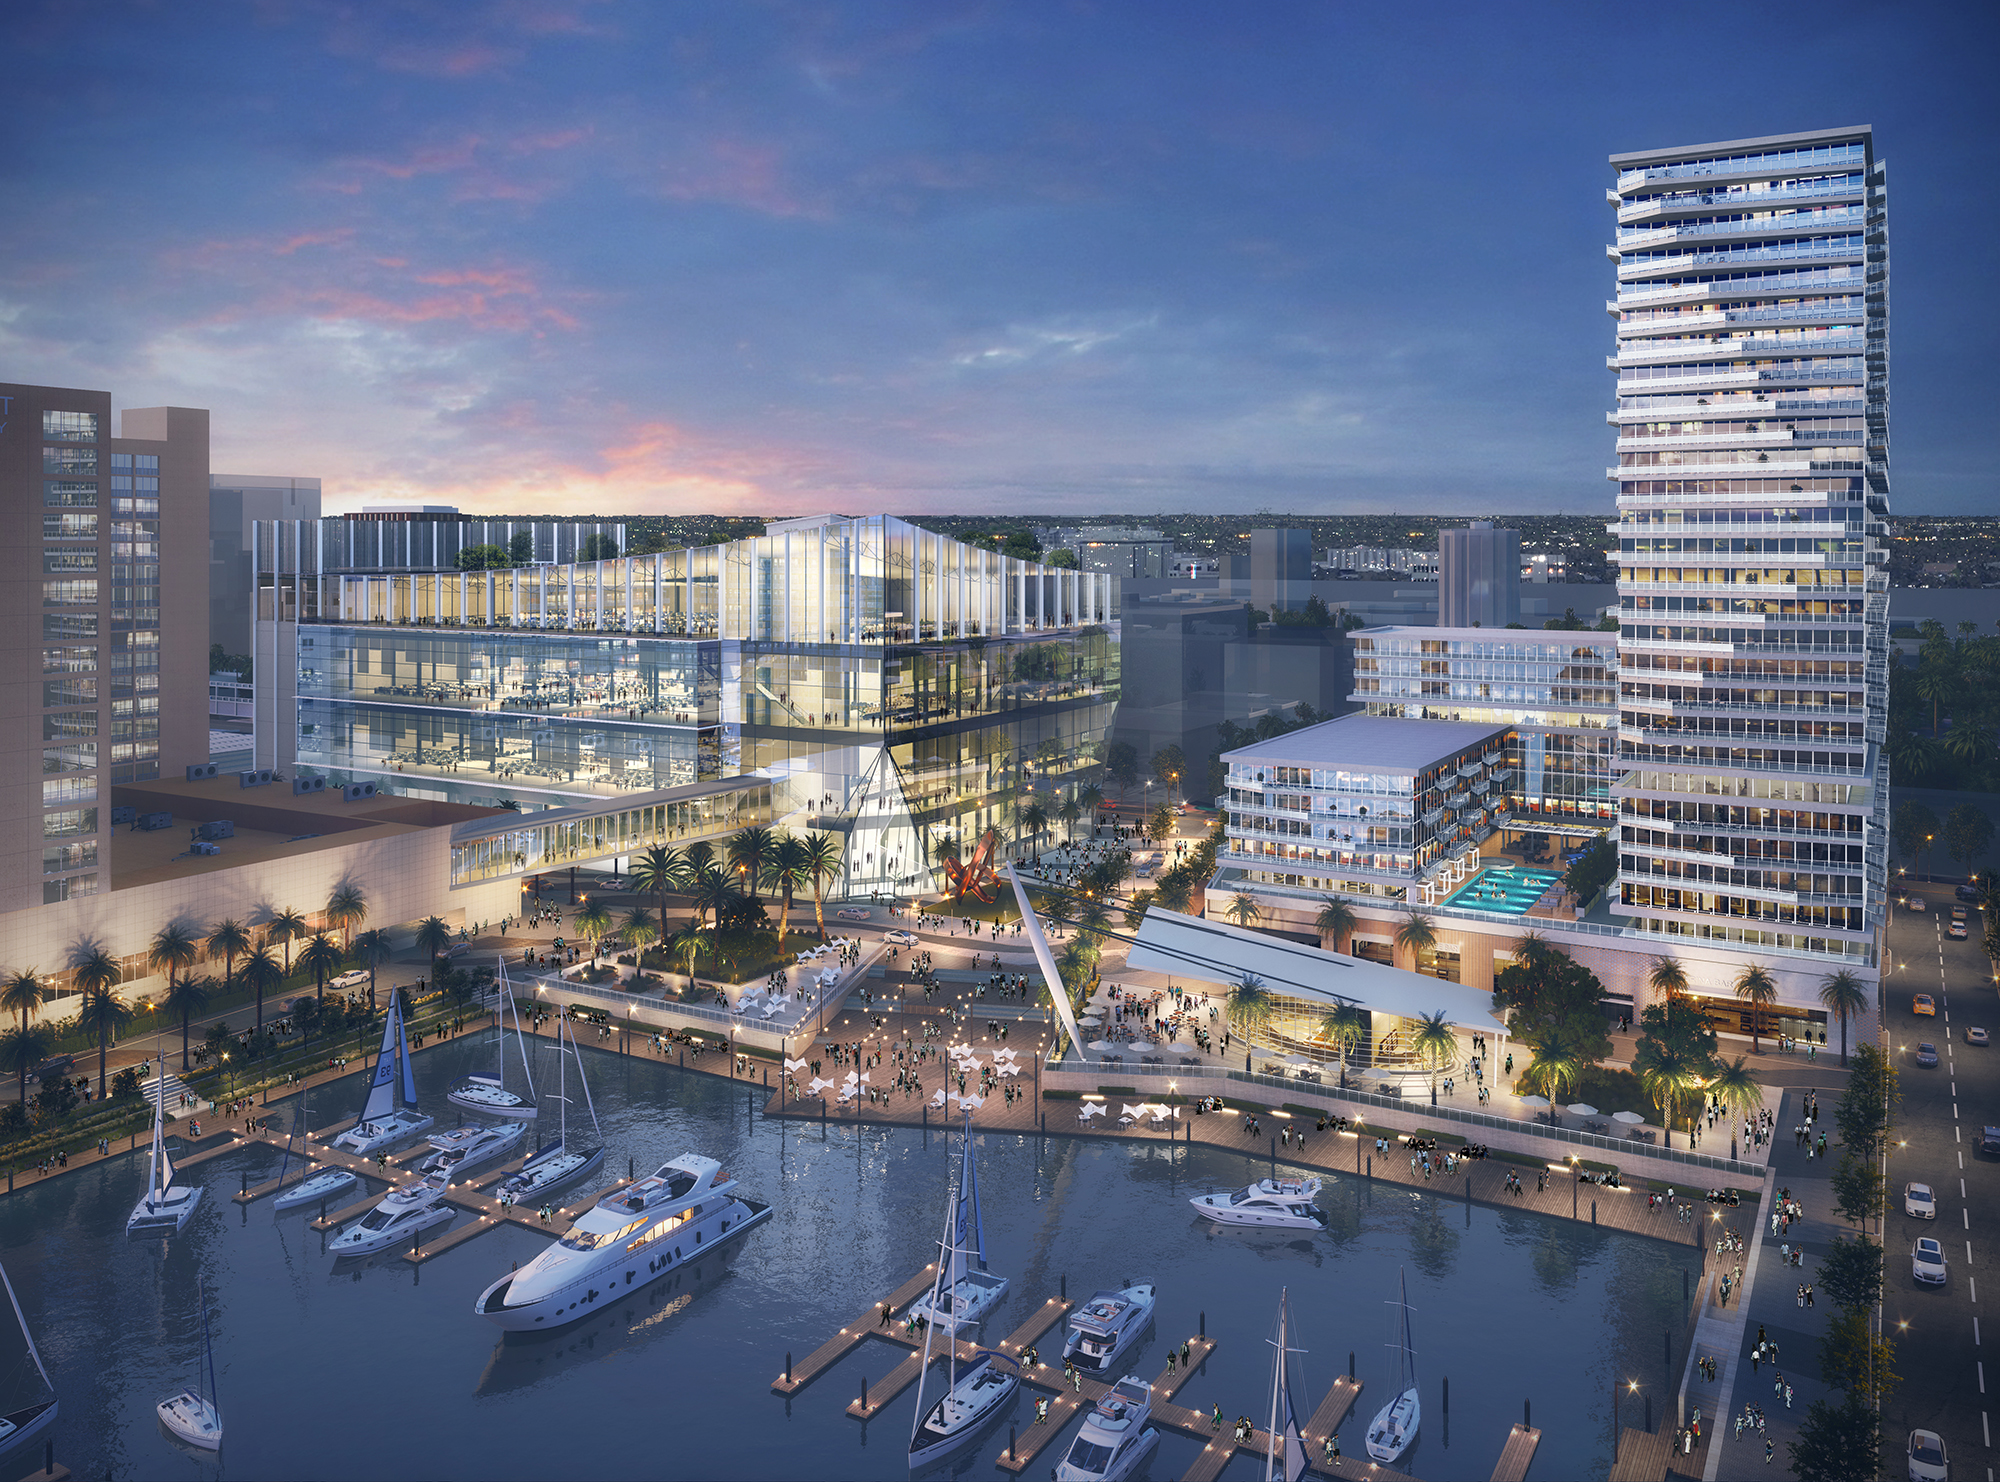 The marina would comprise a two-level restaurant, retail and entertainment plaza.